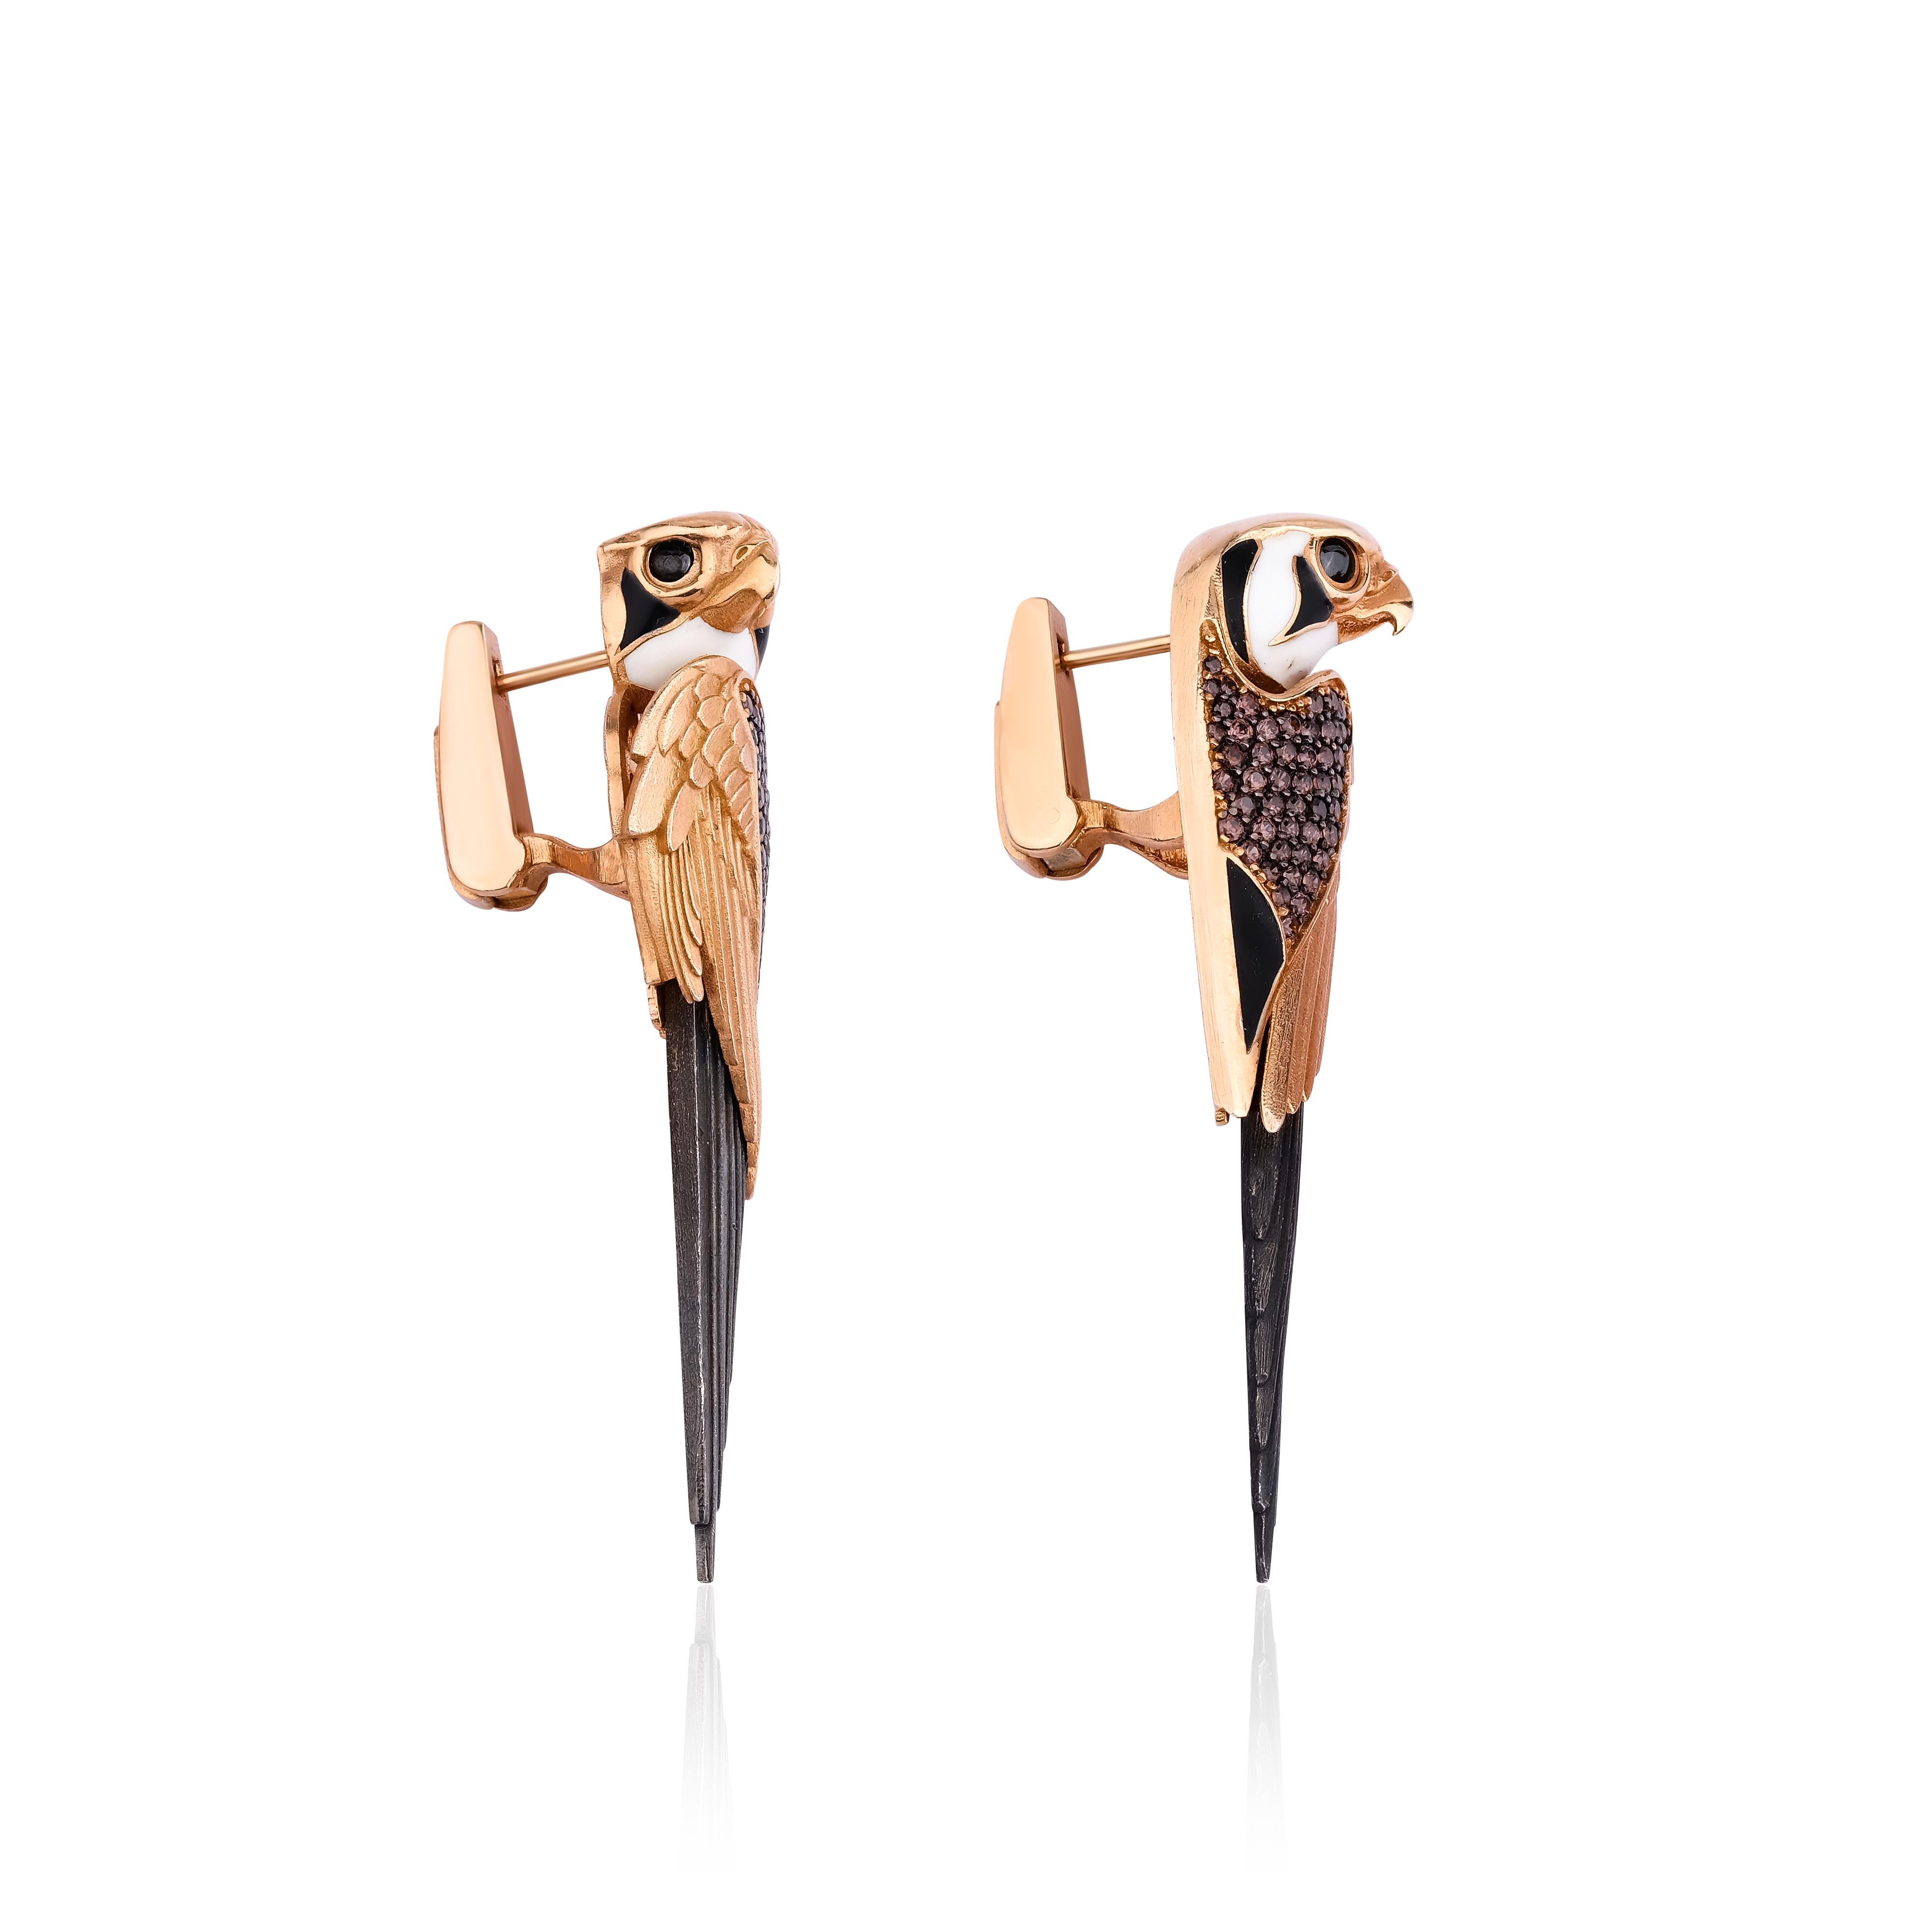 These extraordinary earrings have been expertly crafted to capture the essence of the magnificent Osiris falcon from ancient Egypt. Every intricate detail has been meticulously attended to, resulting in a truly captivating design. The falcon's